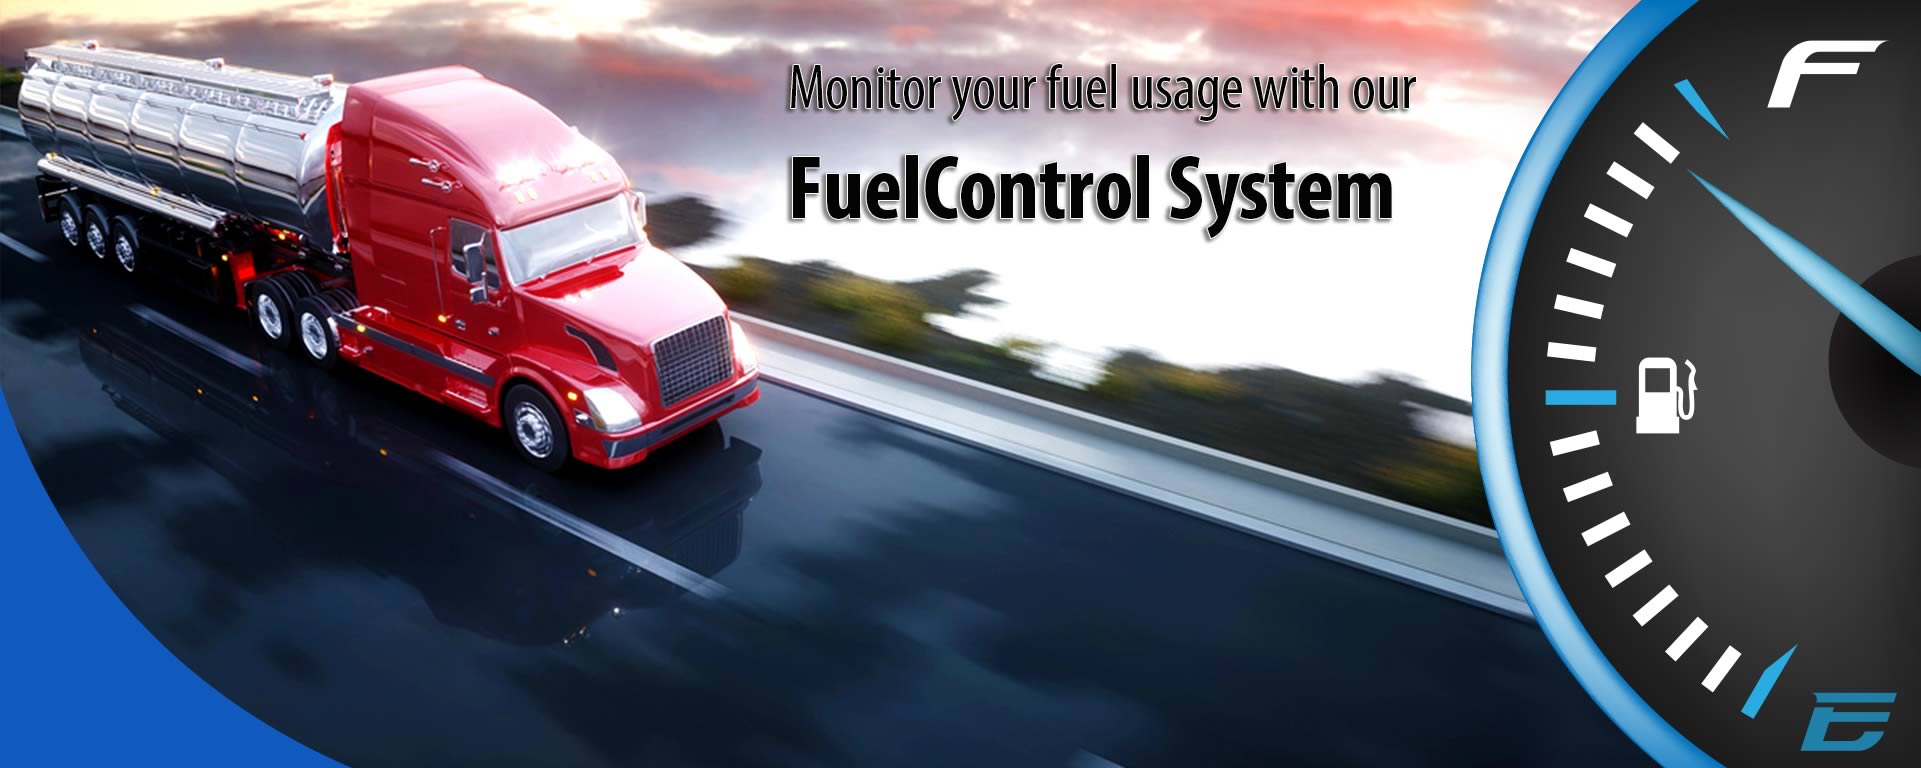 FuelControl System Banner